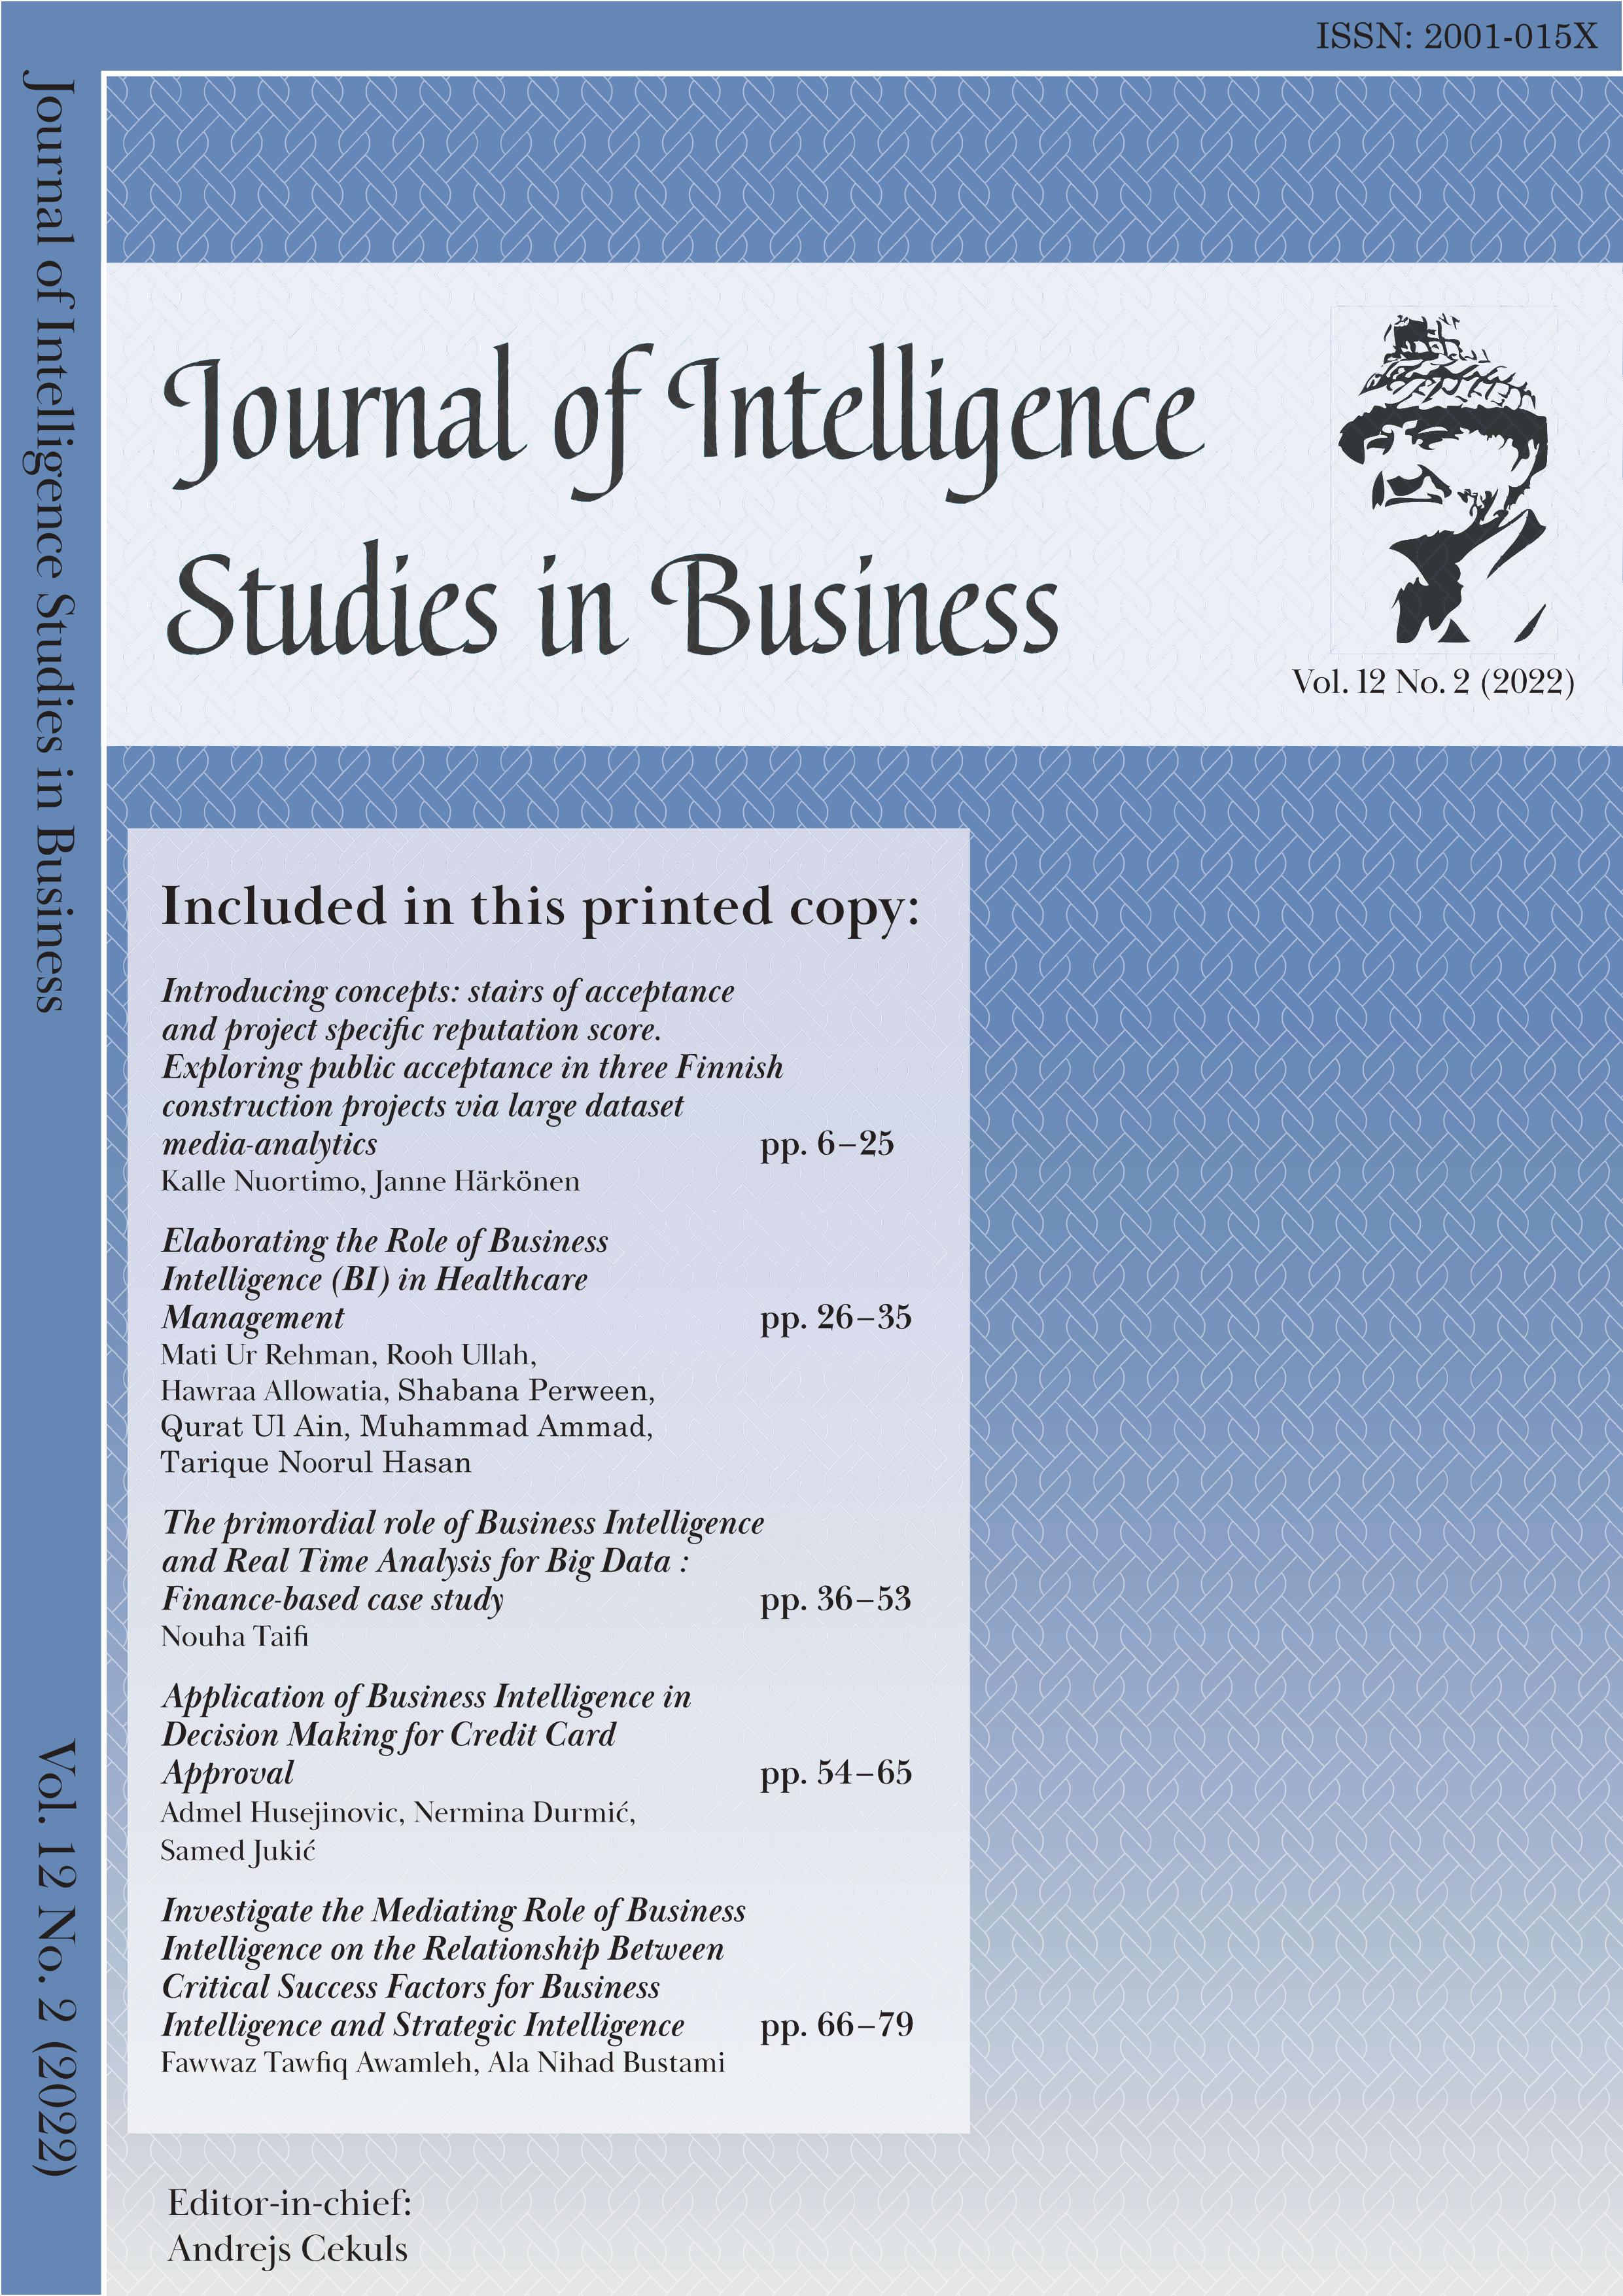 					View Vol. 12 No. 2 (2022): Journal of Intelligence Studies in Business
				